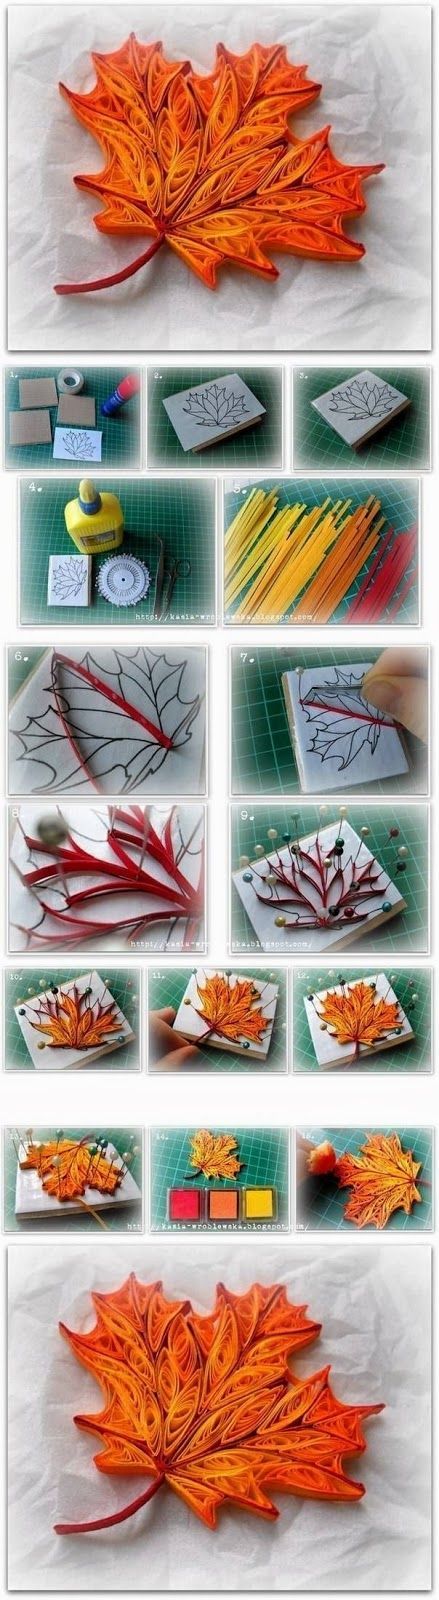 quilling a maple leaf. This makes me want to try quilling more than anything els